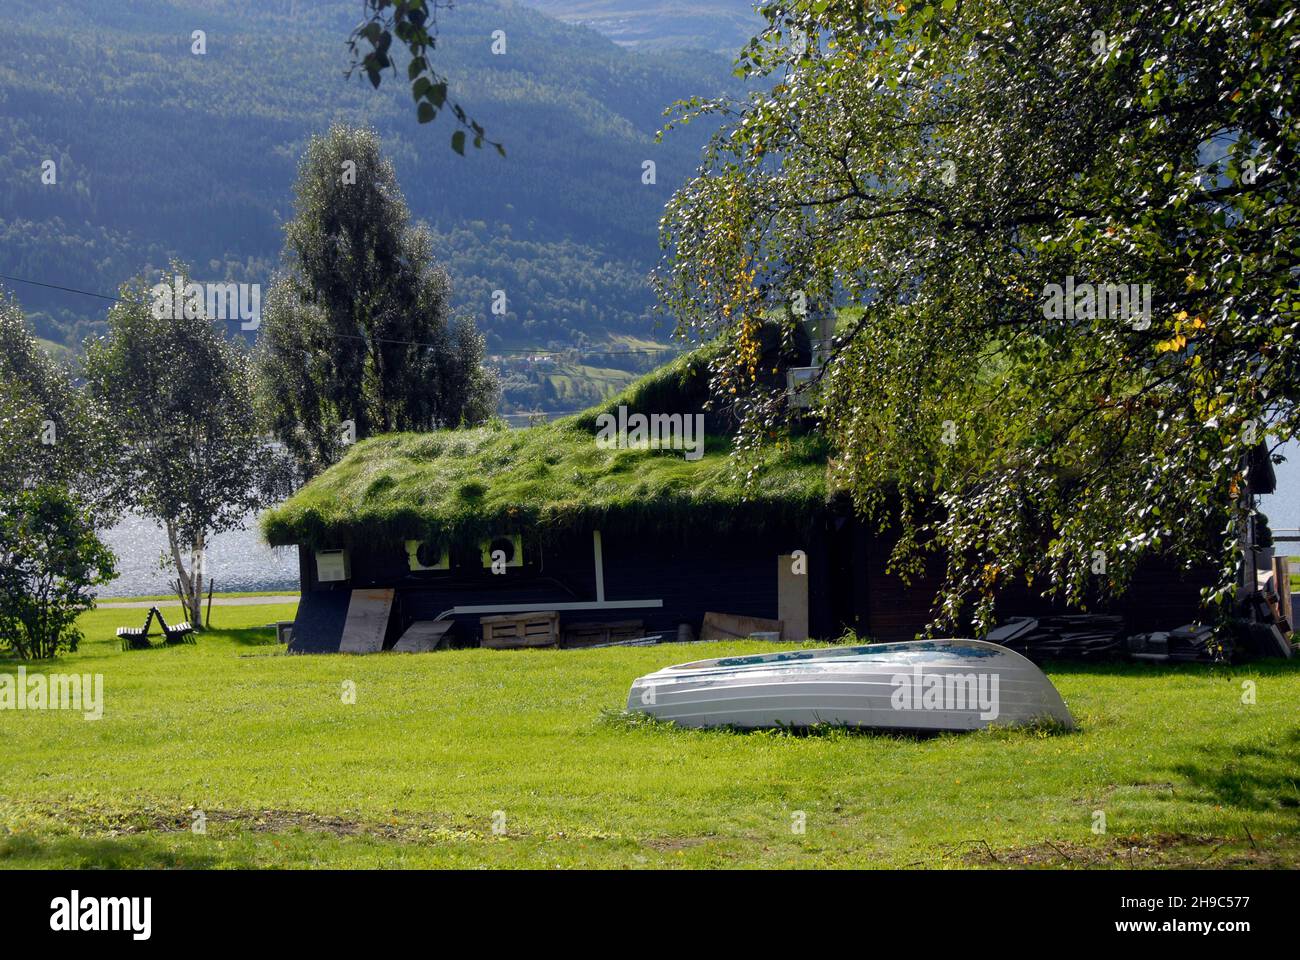 Waterside traditional building with grass roof and upturned boat beside it, Voss, Norway Stock Photo